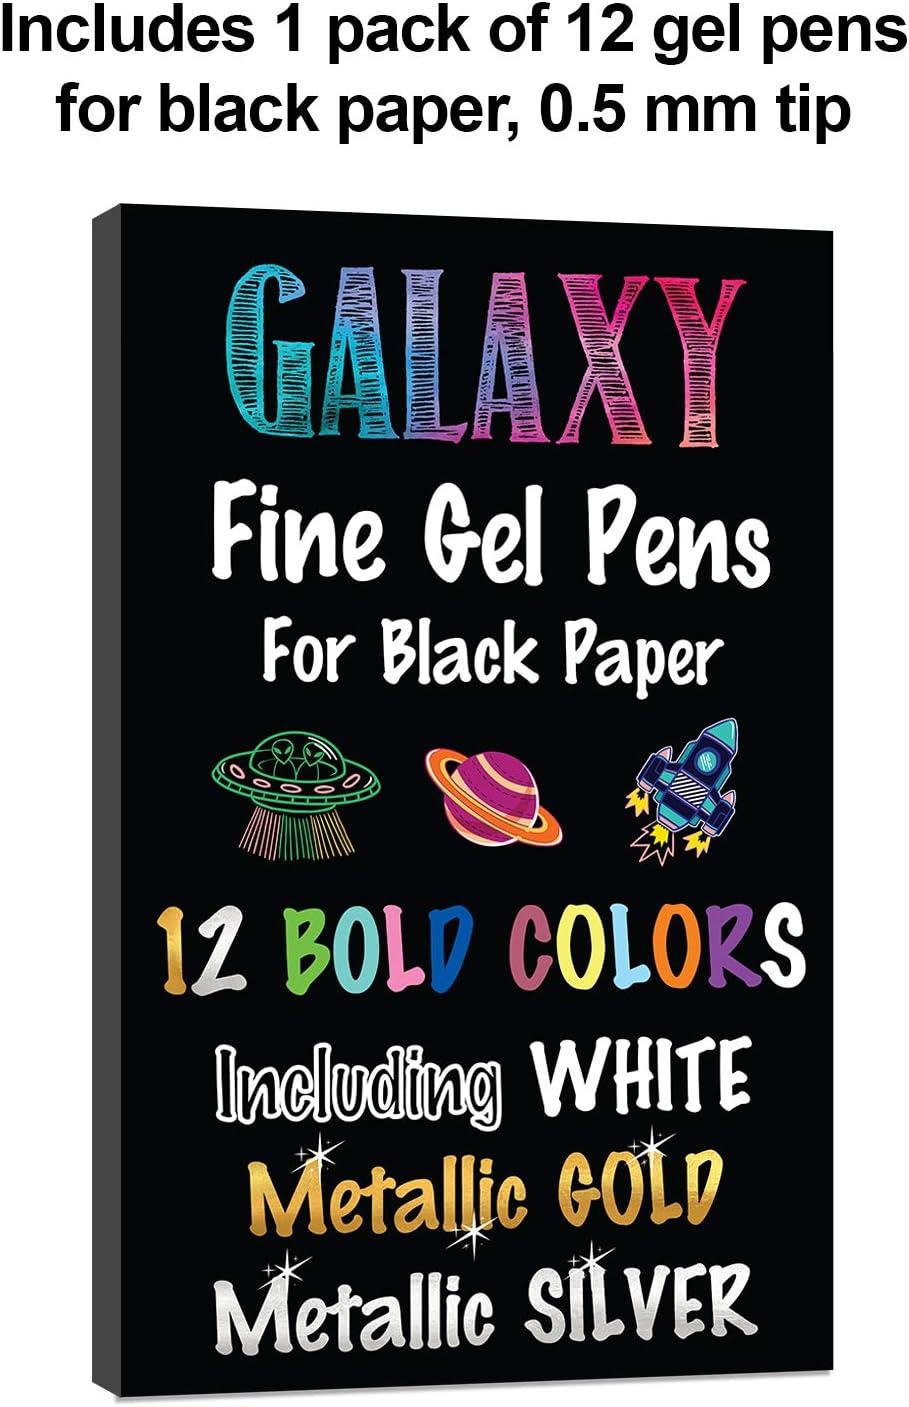  27 Pack Black Sticky Notes and Metallic Pens for